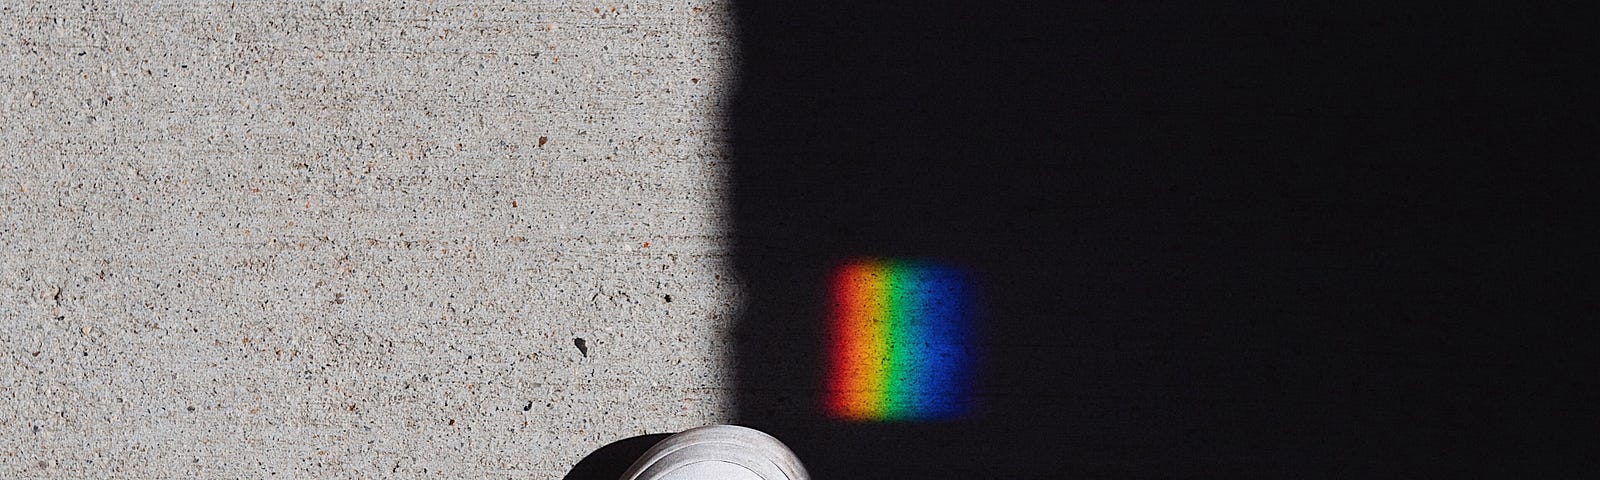 A white shoe on a pavement bisected by a dark, black shadow. To the left is light-gray pavement. To the right is the shadow. Above the show is a small square patch of rainbow light.